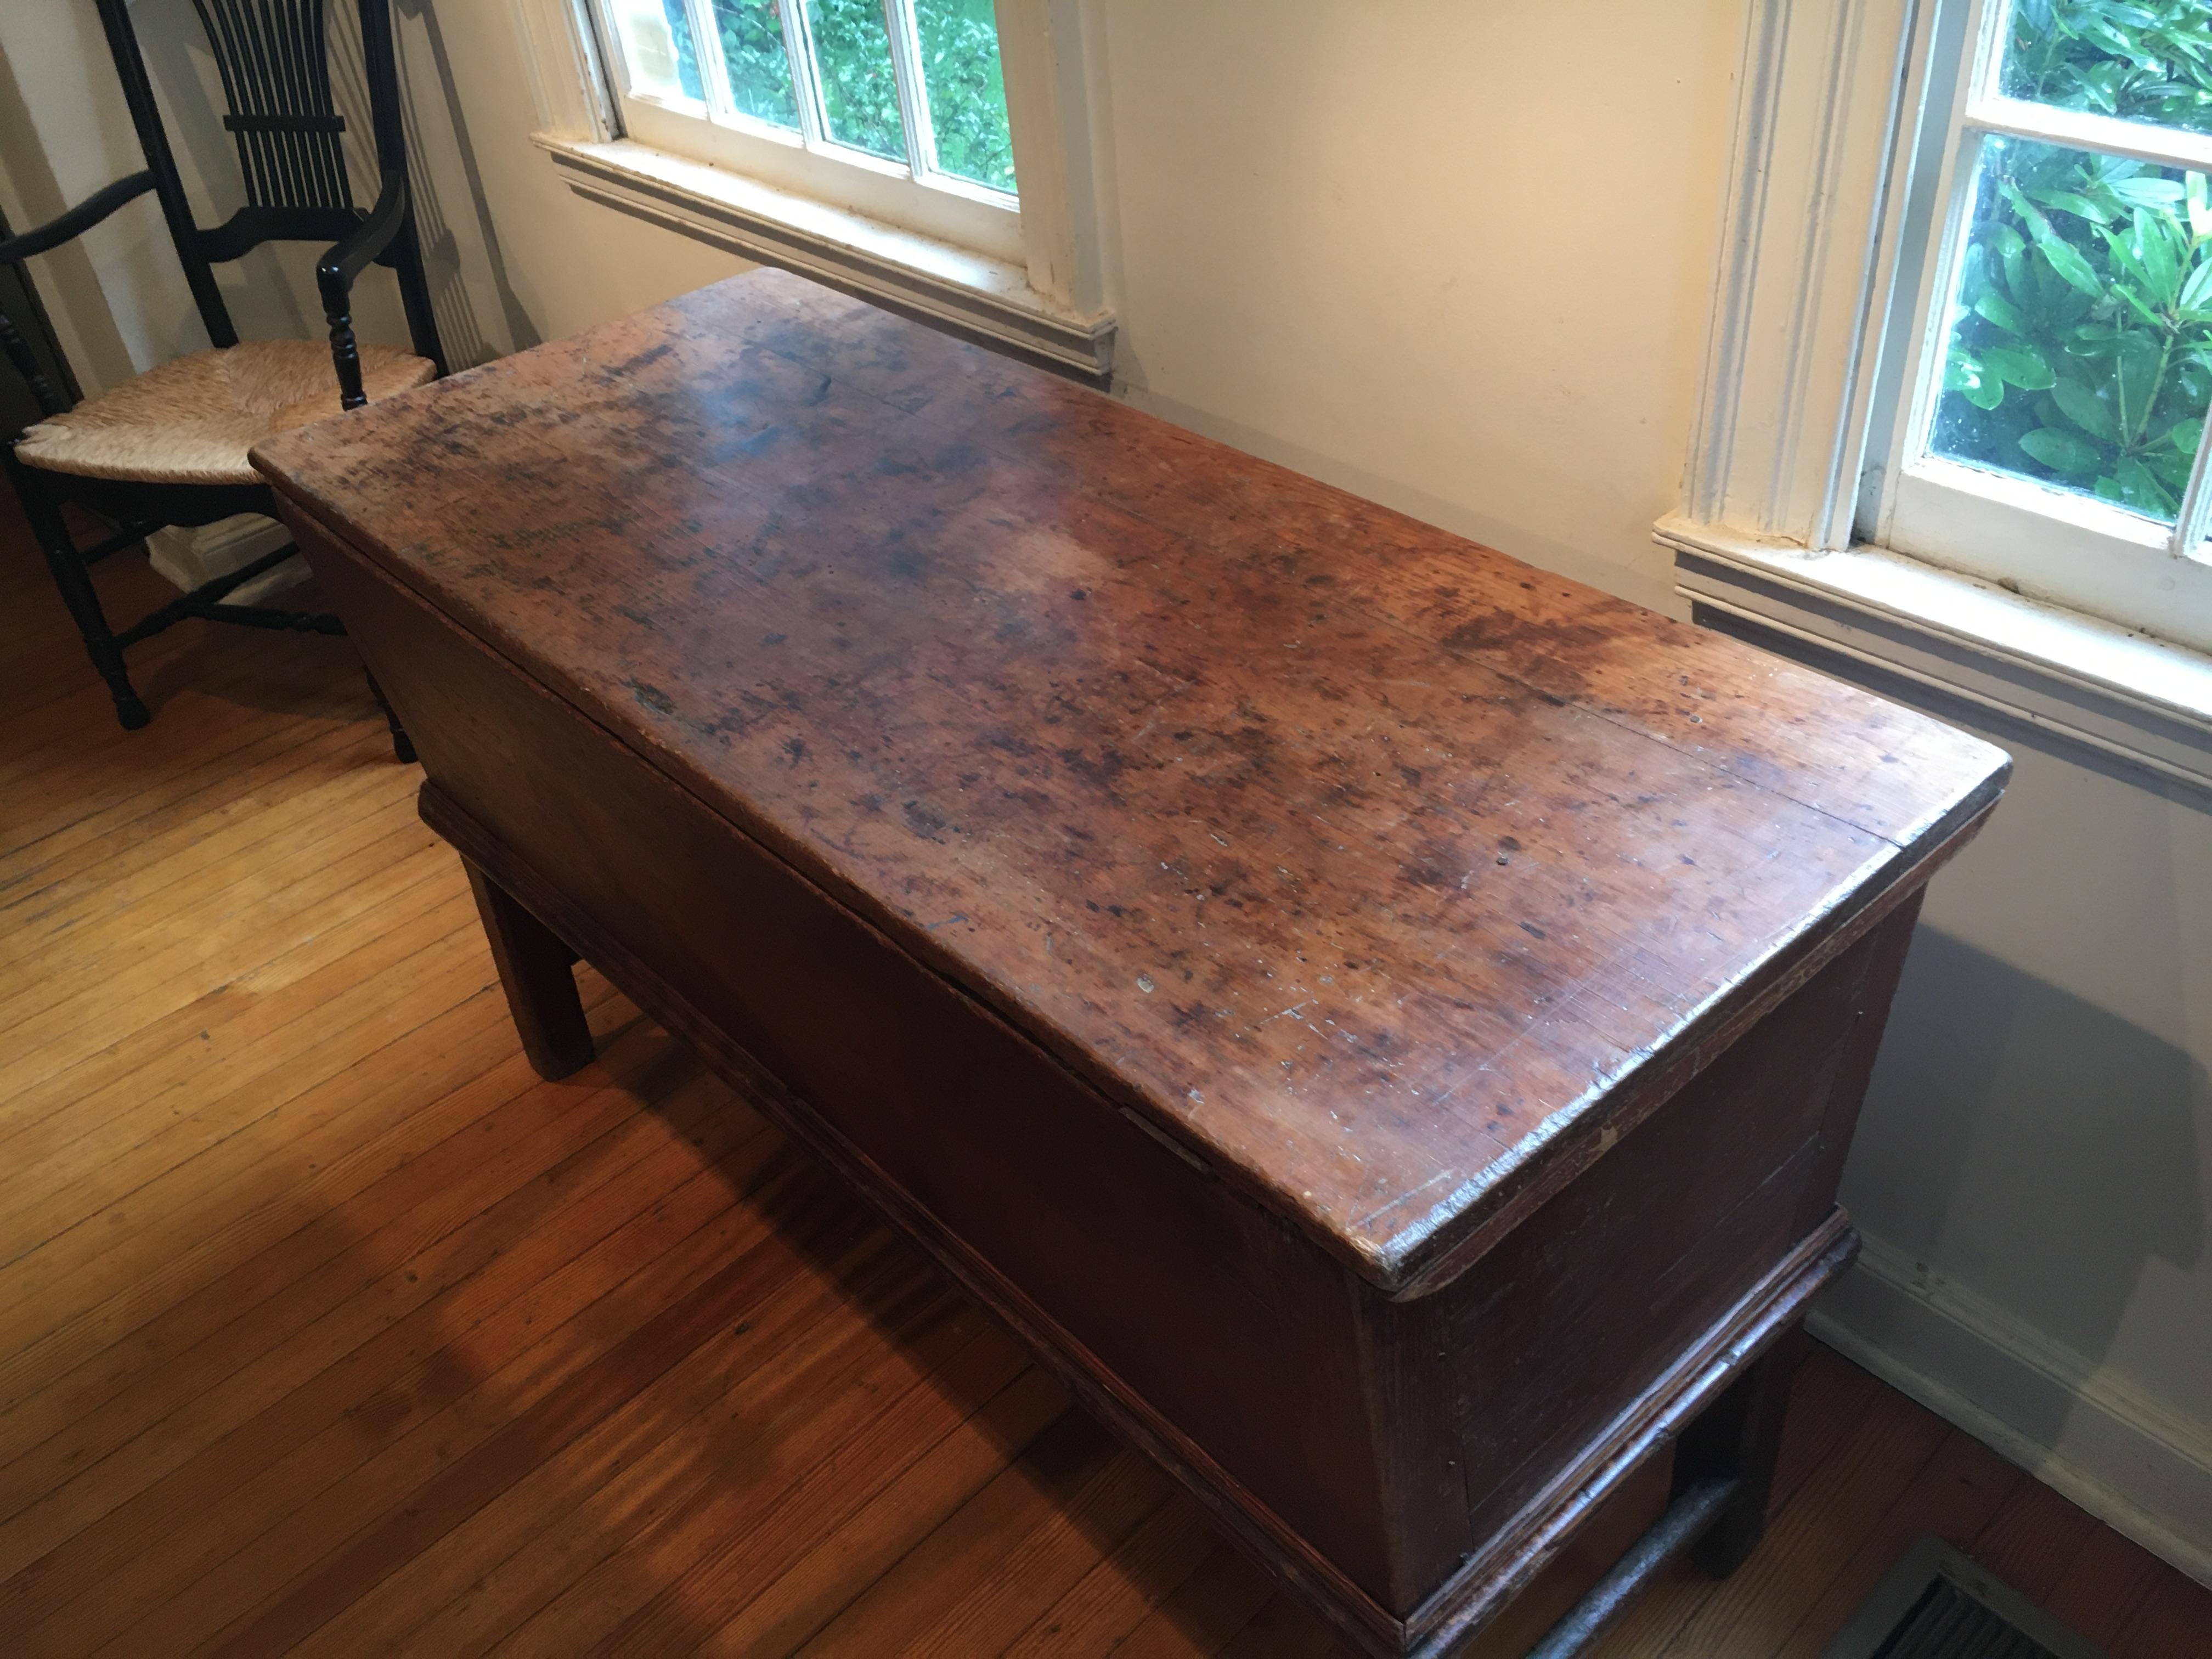 - Possibly the nicest dough table we have ever bought. The top comes off, which was used for rising dough. What a wonderful dining or kitchen piece and makes quite a statement and has original paint on the base. This piece is flawless!